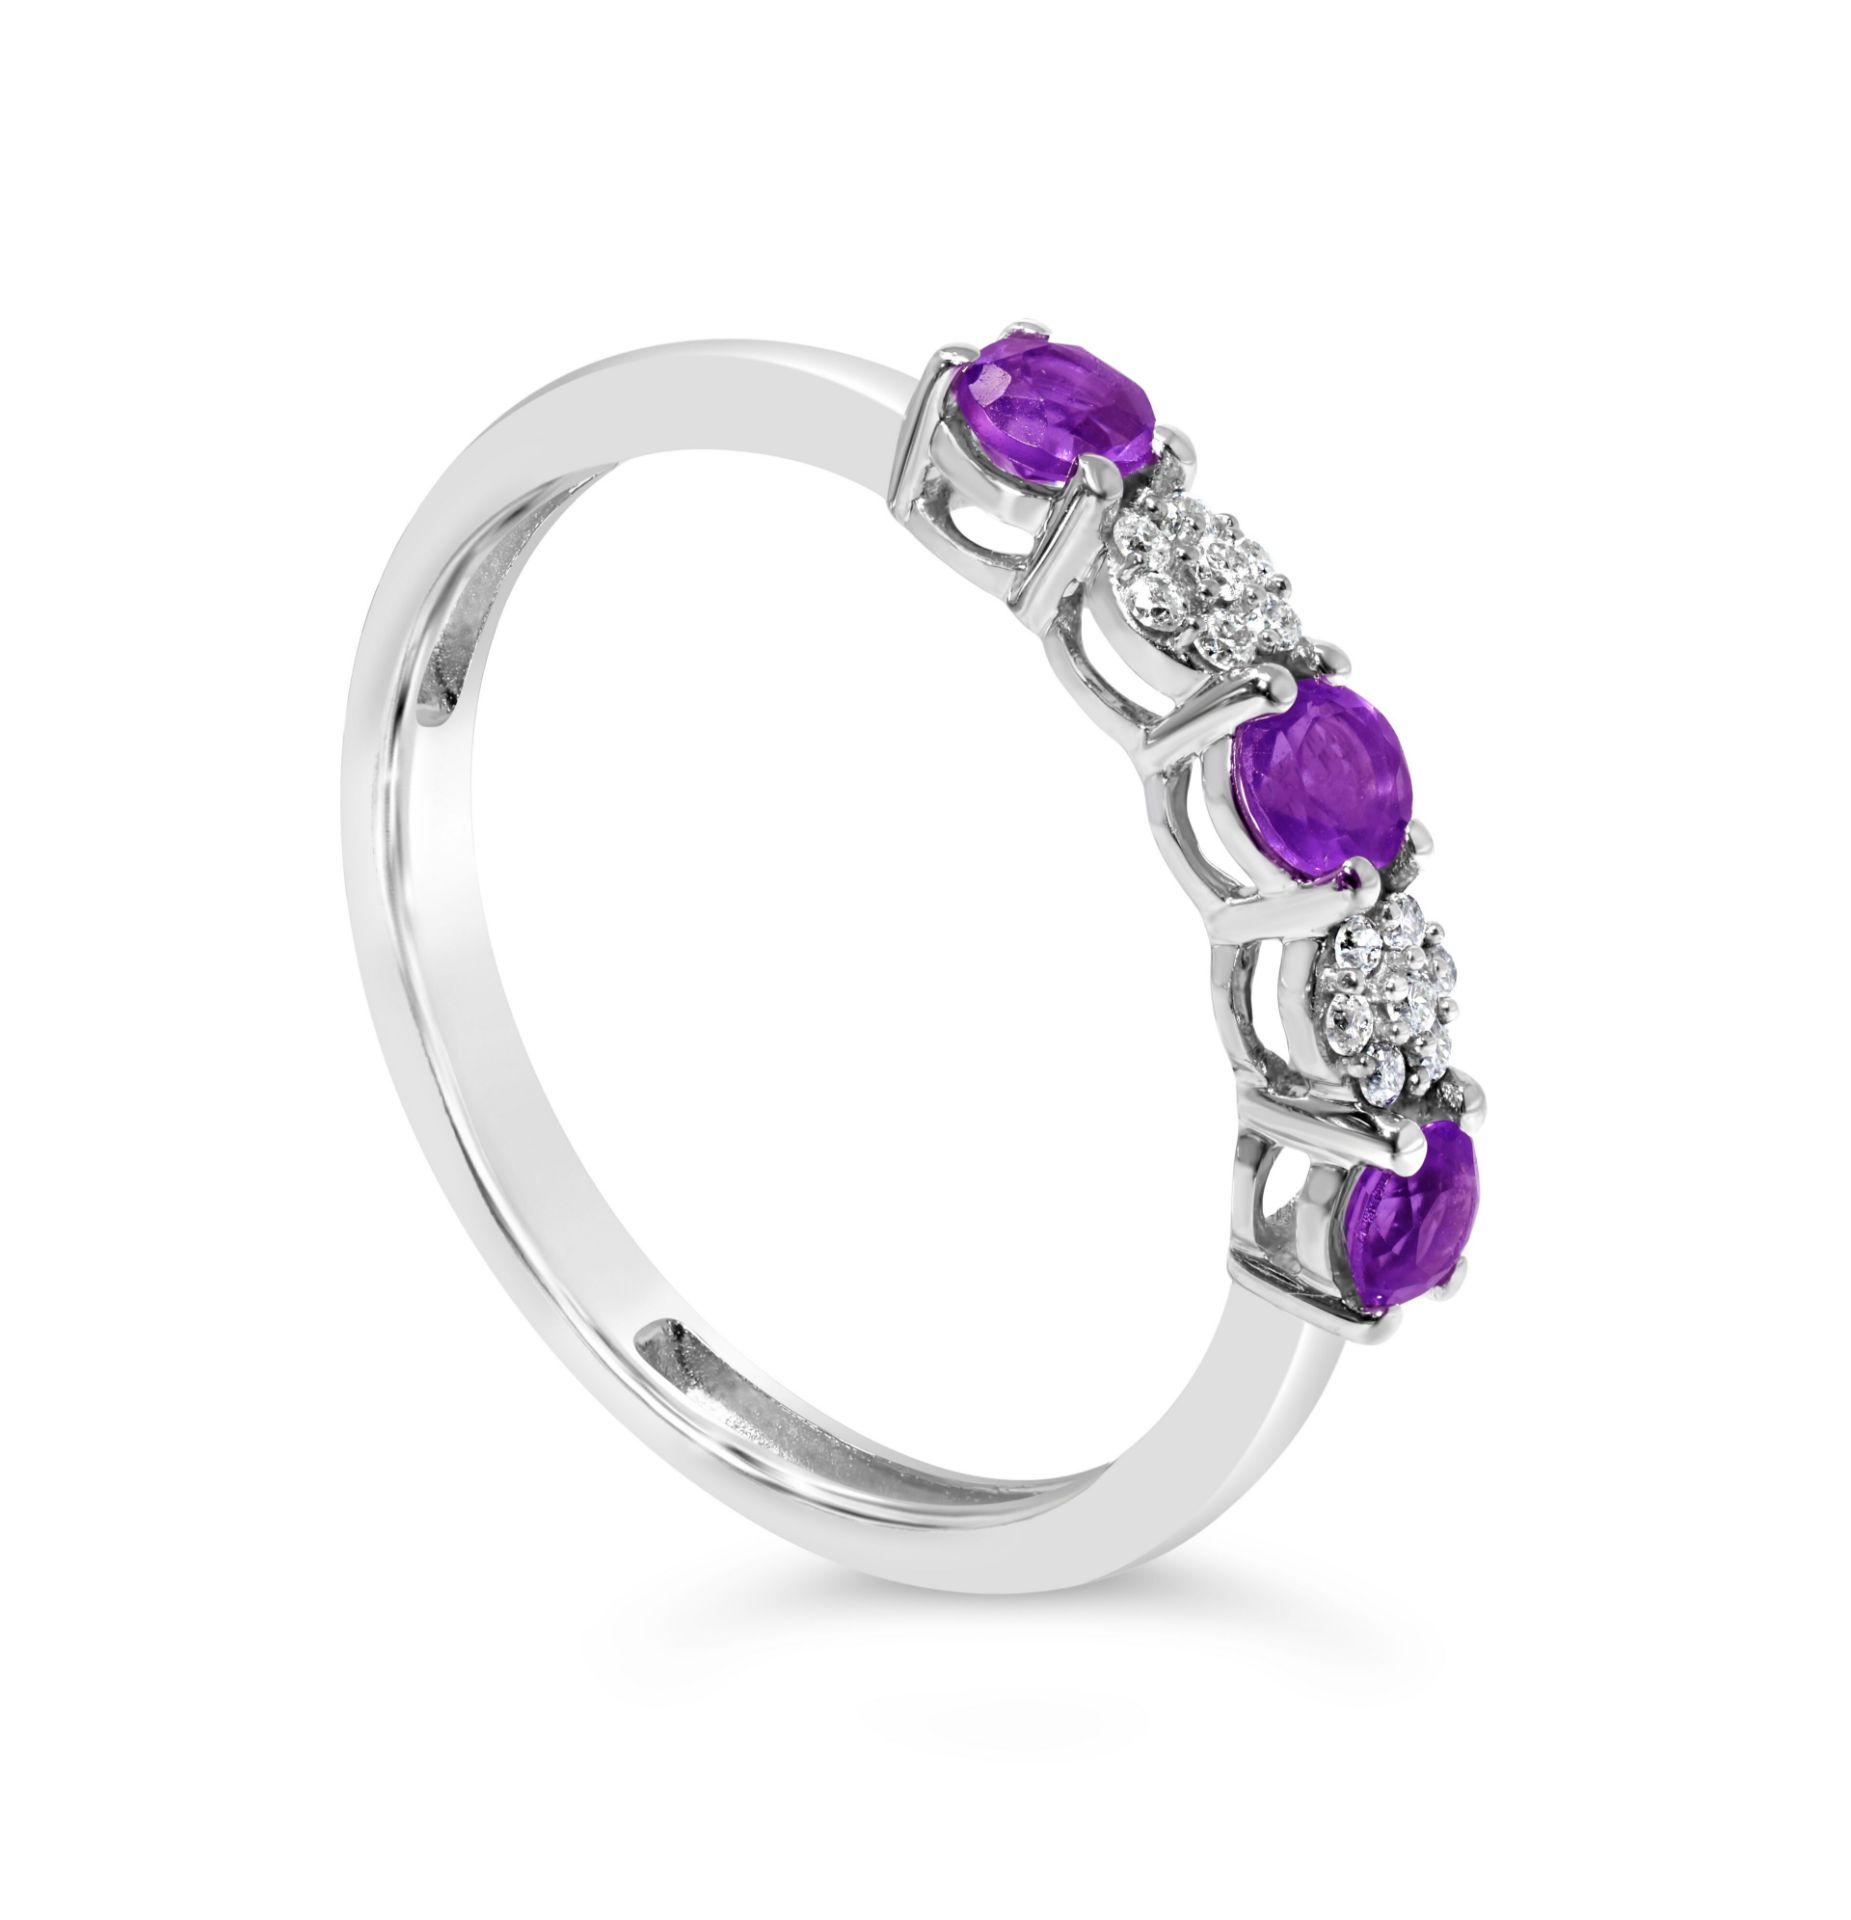 Amethyst and diamond eternity ring, Metal 9ct White Gold, Weight 1.48, Diamond Weight(ct) 0.07, - Image 2 of 3